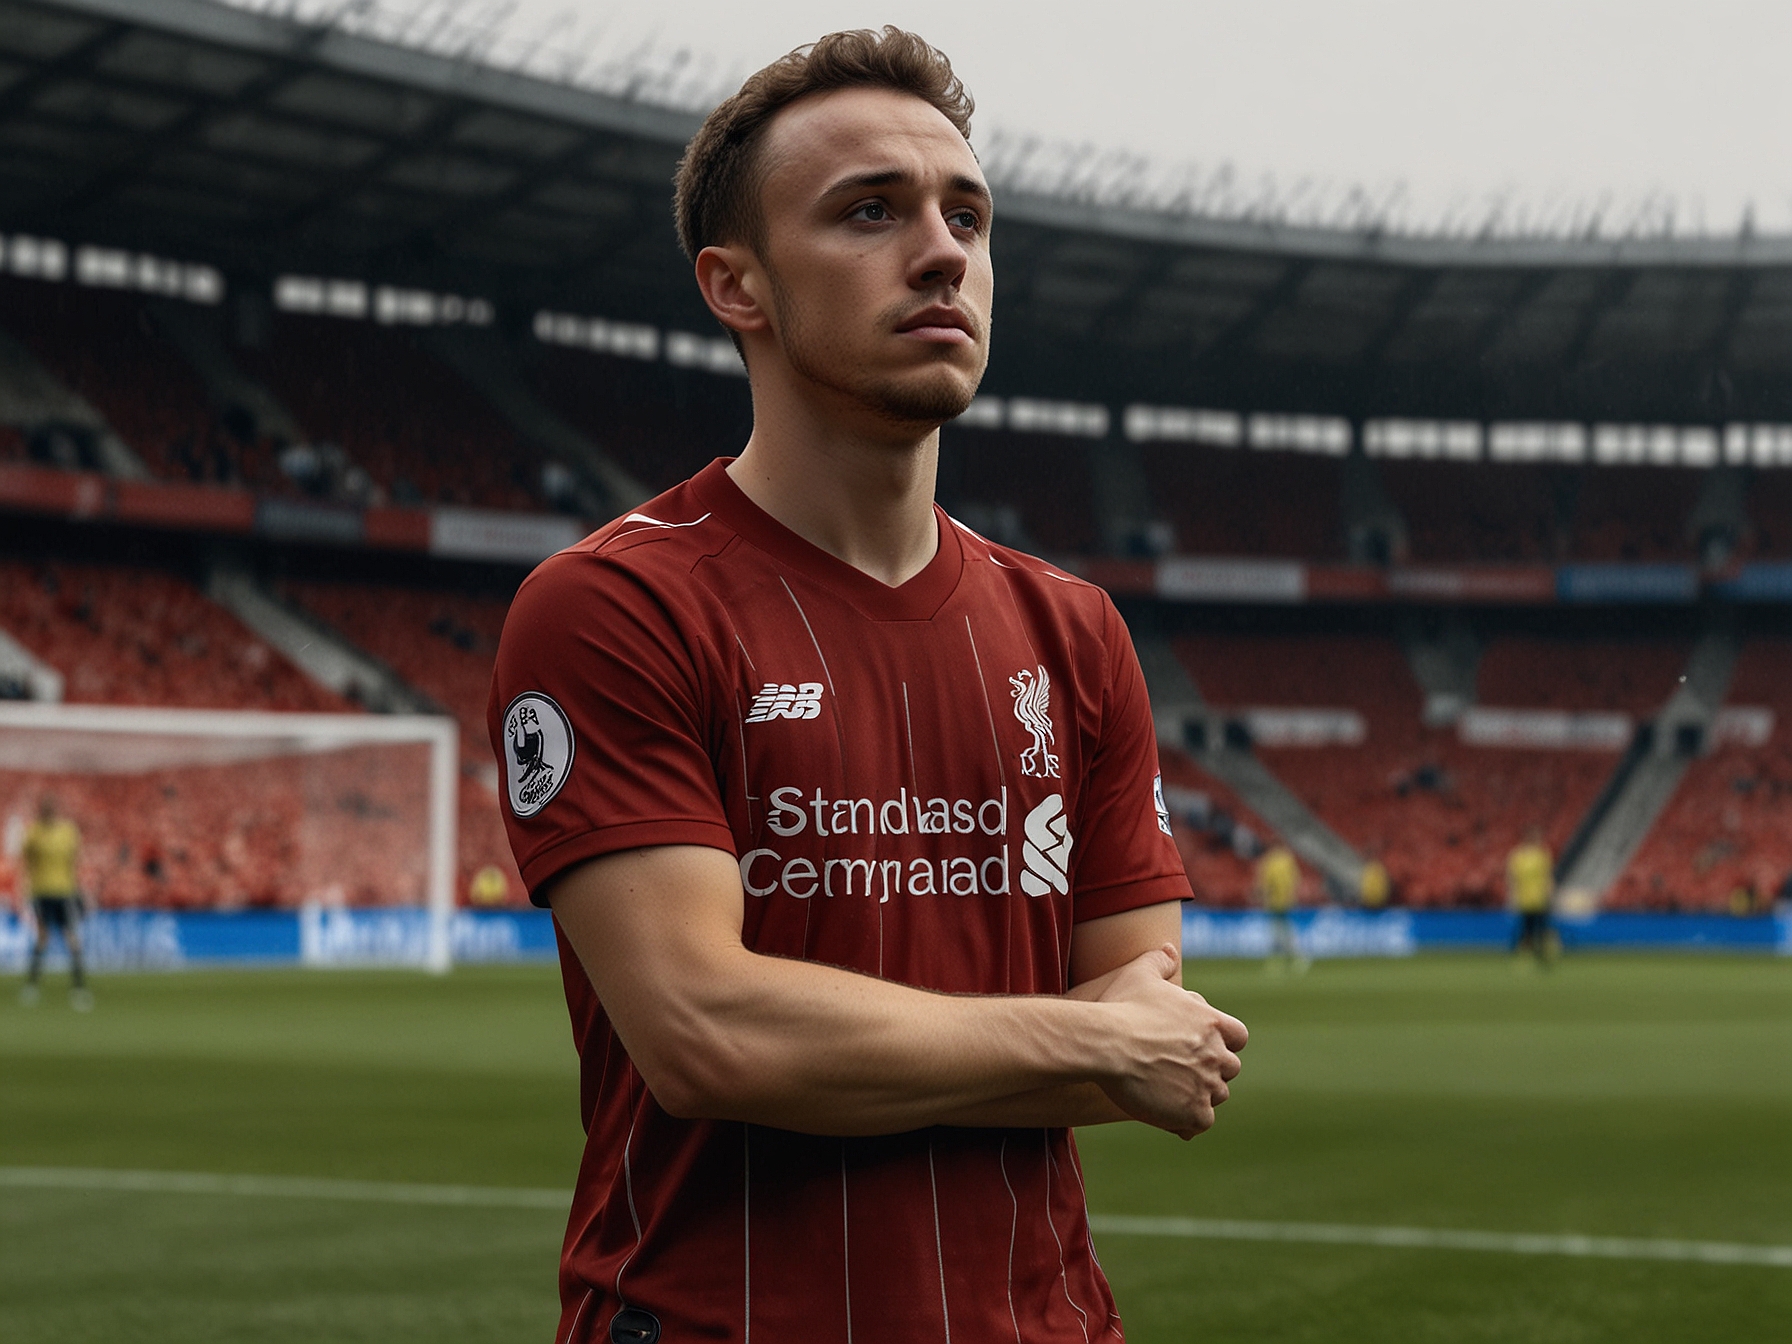 Diogo Jota in a Liverpool jersey, looking dejected on the sidelines, representing his struggle with injuries and time away from the pitch.